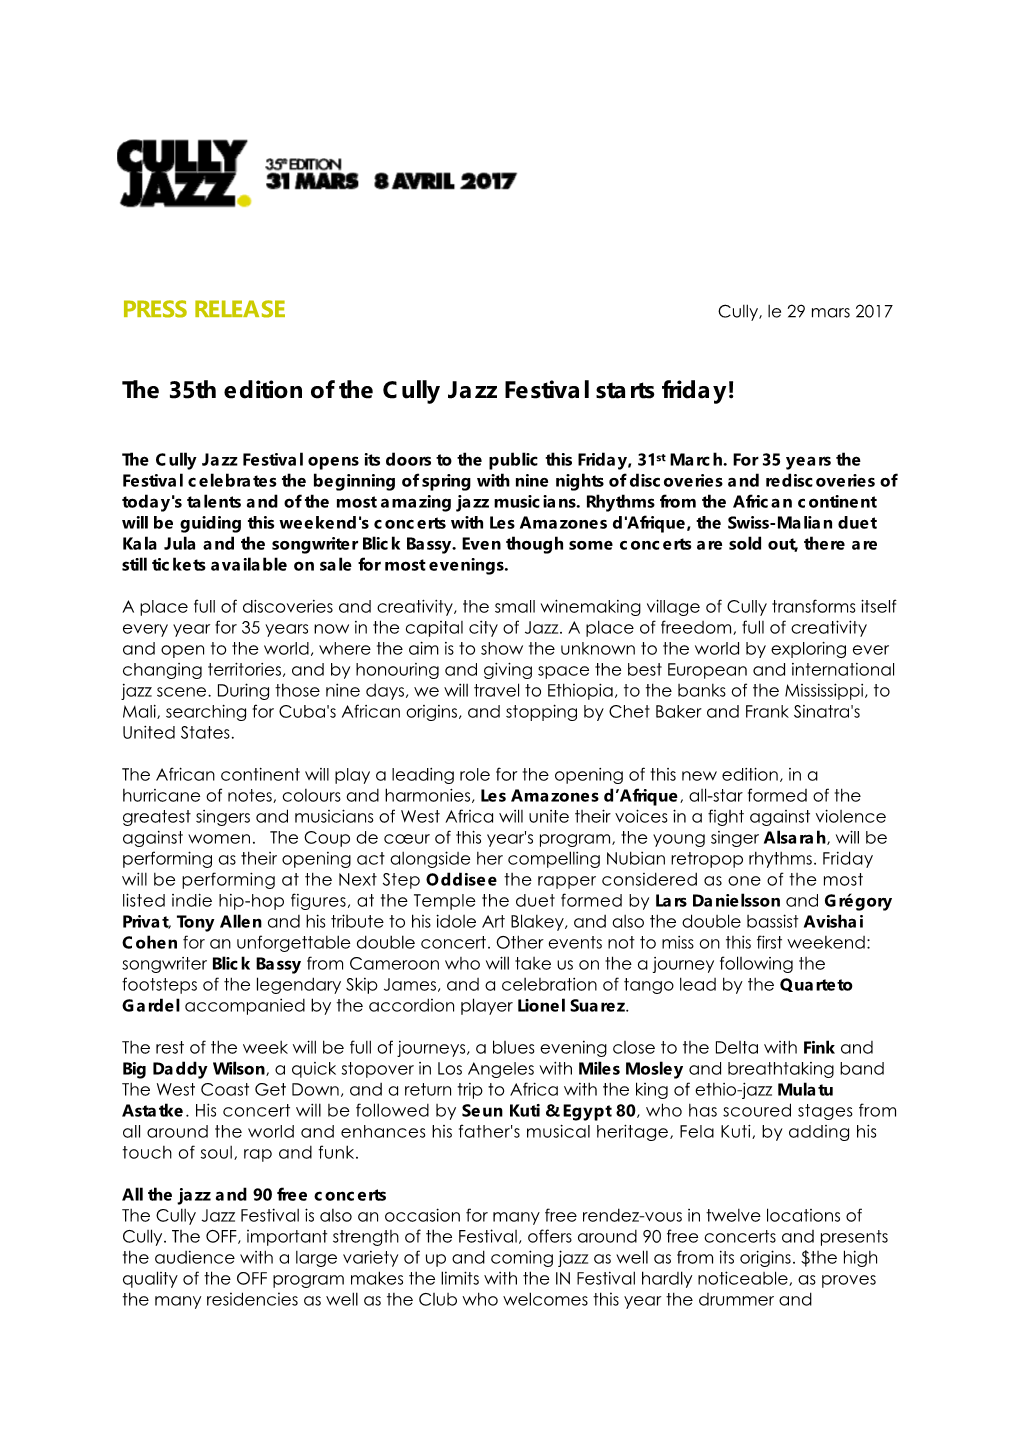 PRESS RELEASE the 35Th Edition of the Cully Jazz Festival Starts Friday!